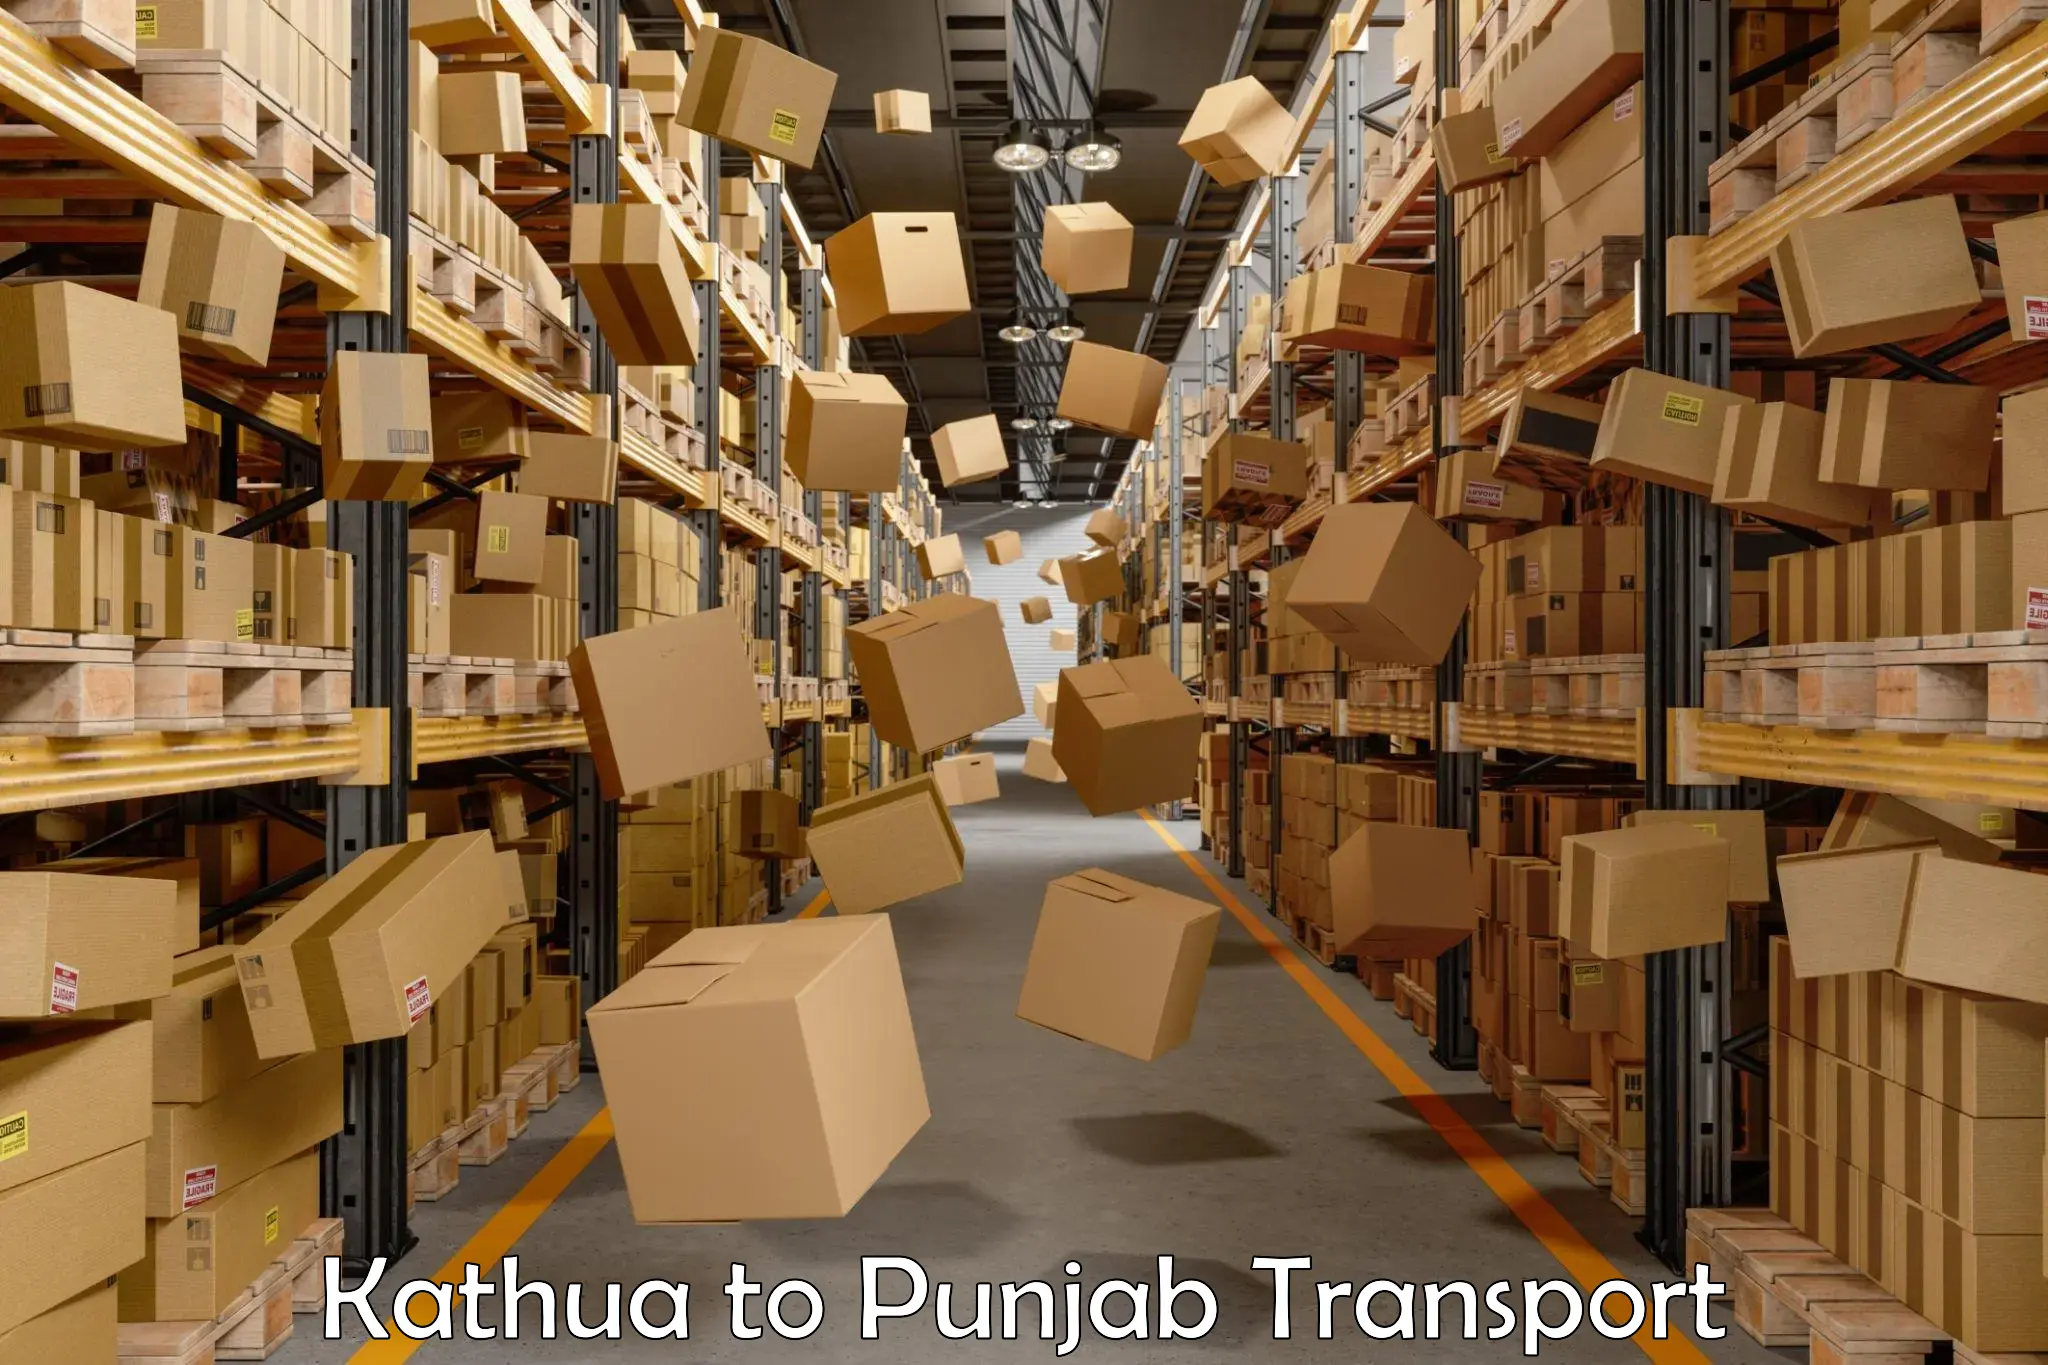 Truck transport companies in India Kathua to Punjab